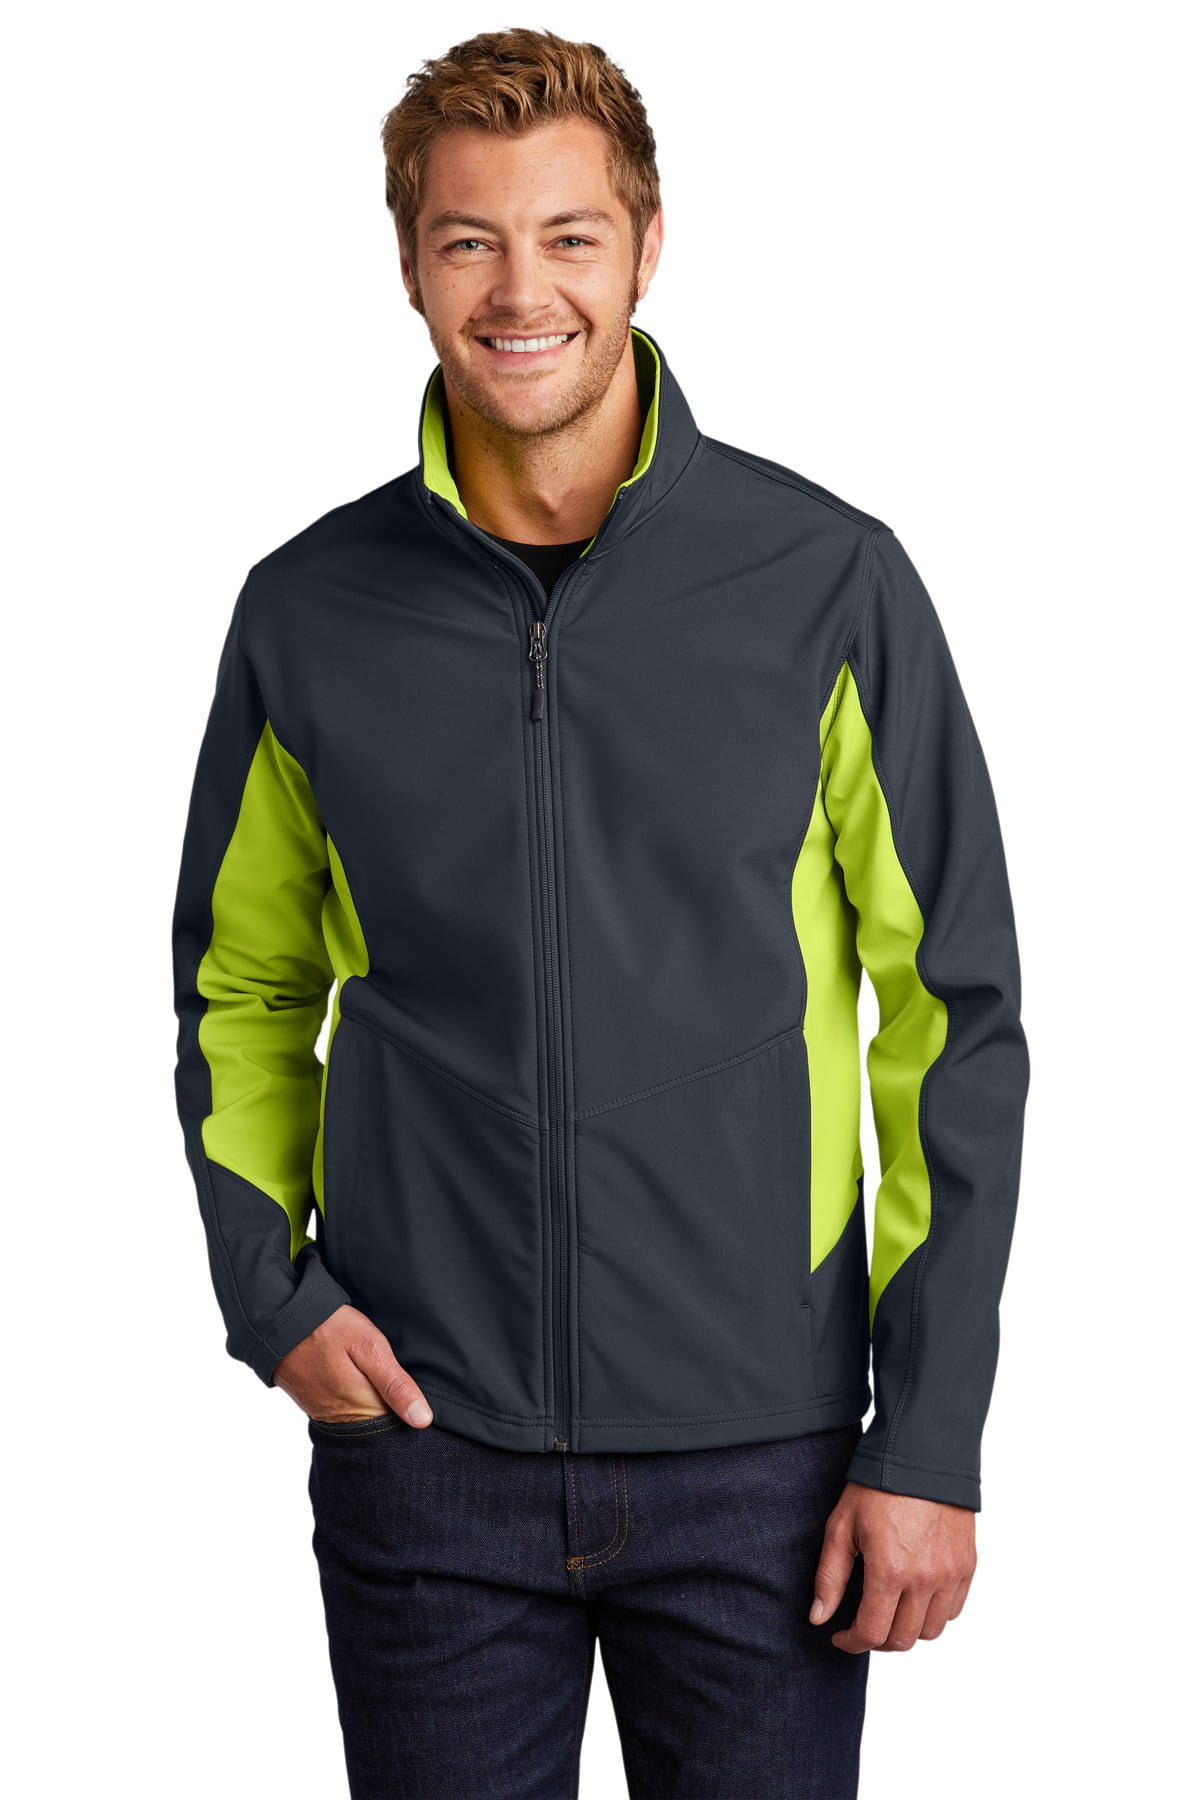 Details about   Uhlsport Sports Football Training Mens Hooded Full Zip Jacket Waterproof Top